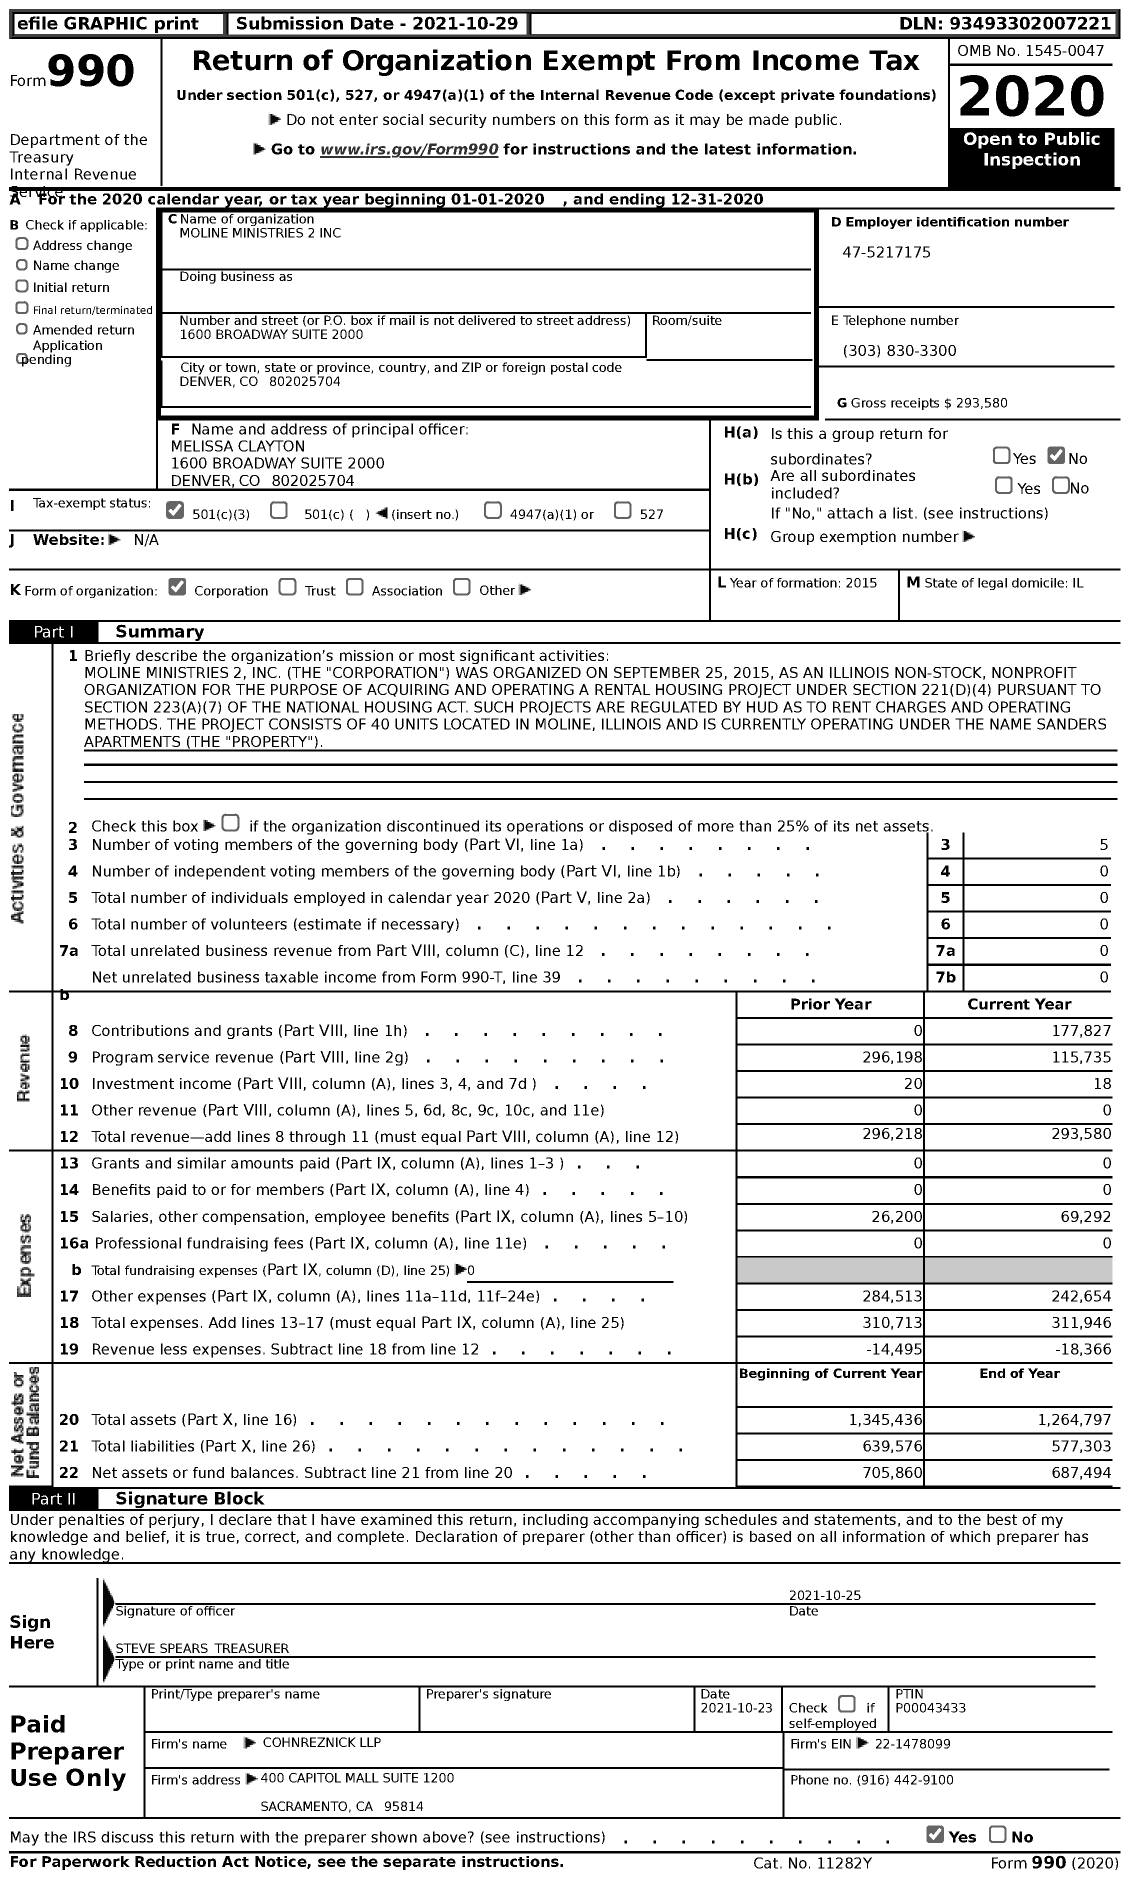 Image of first page of 2020 Form 990 for Moline Ministries 2